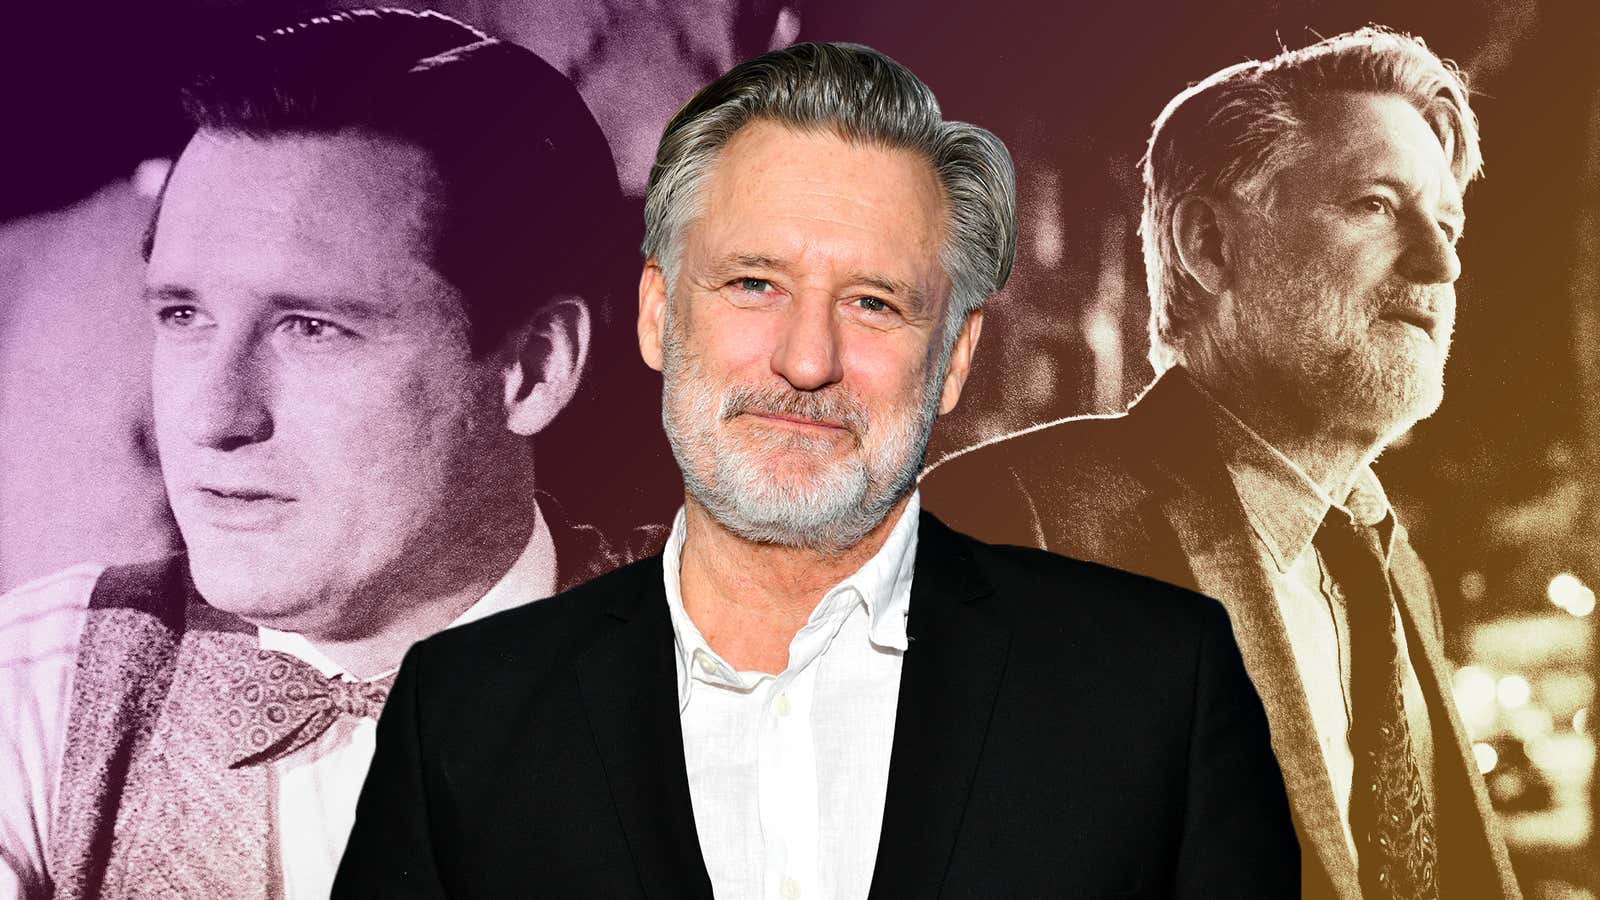 Bill Pullman on how to play the president and being the guy who doesn’t get the girl